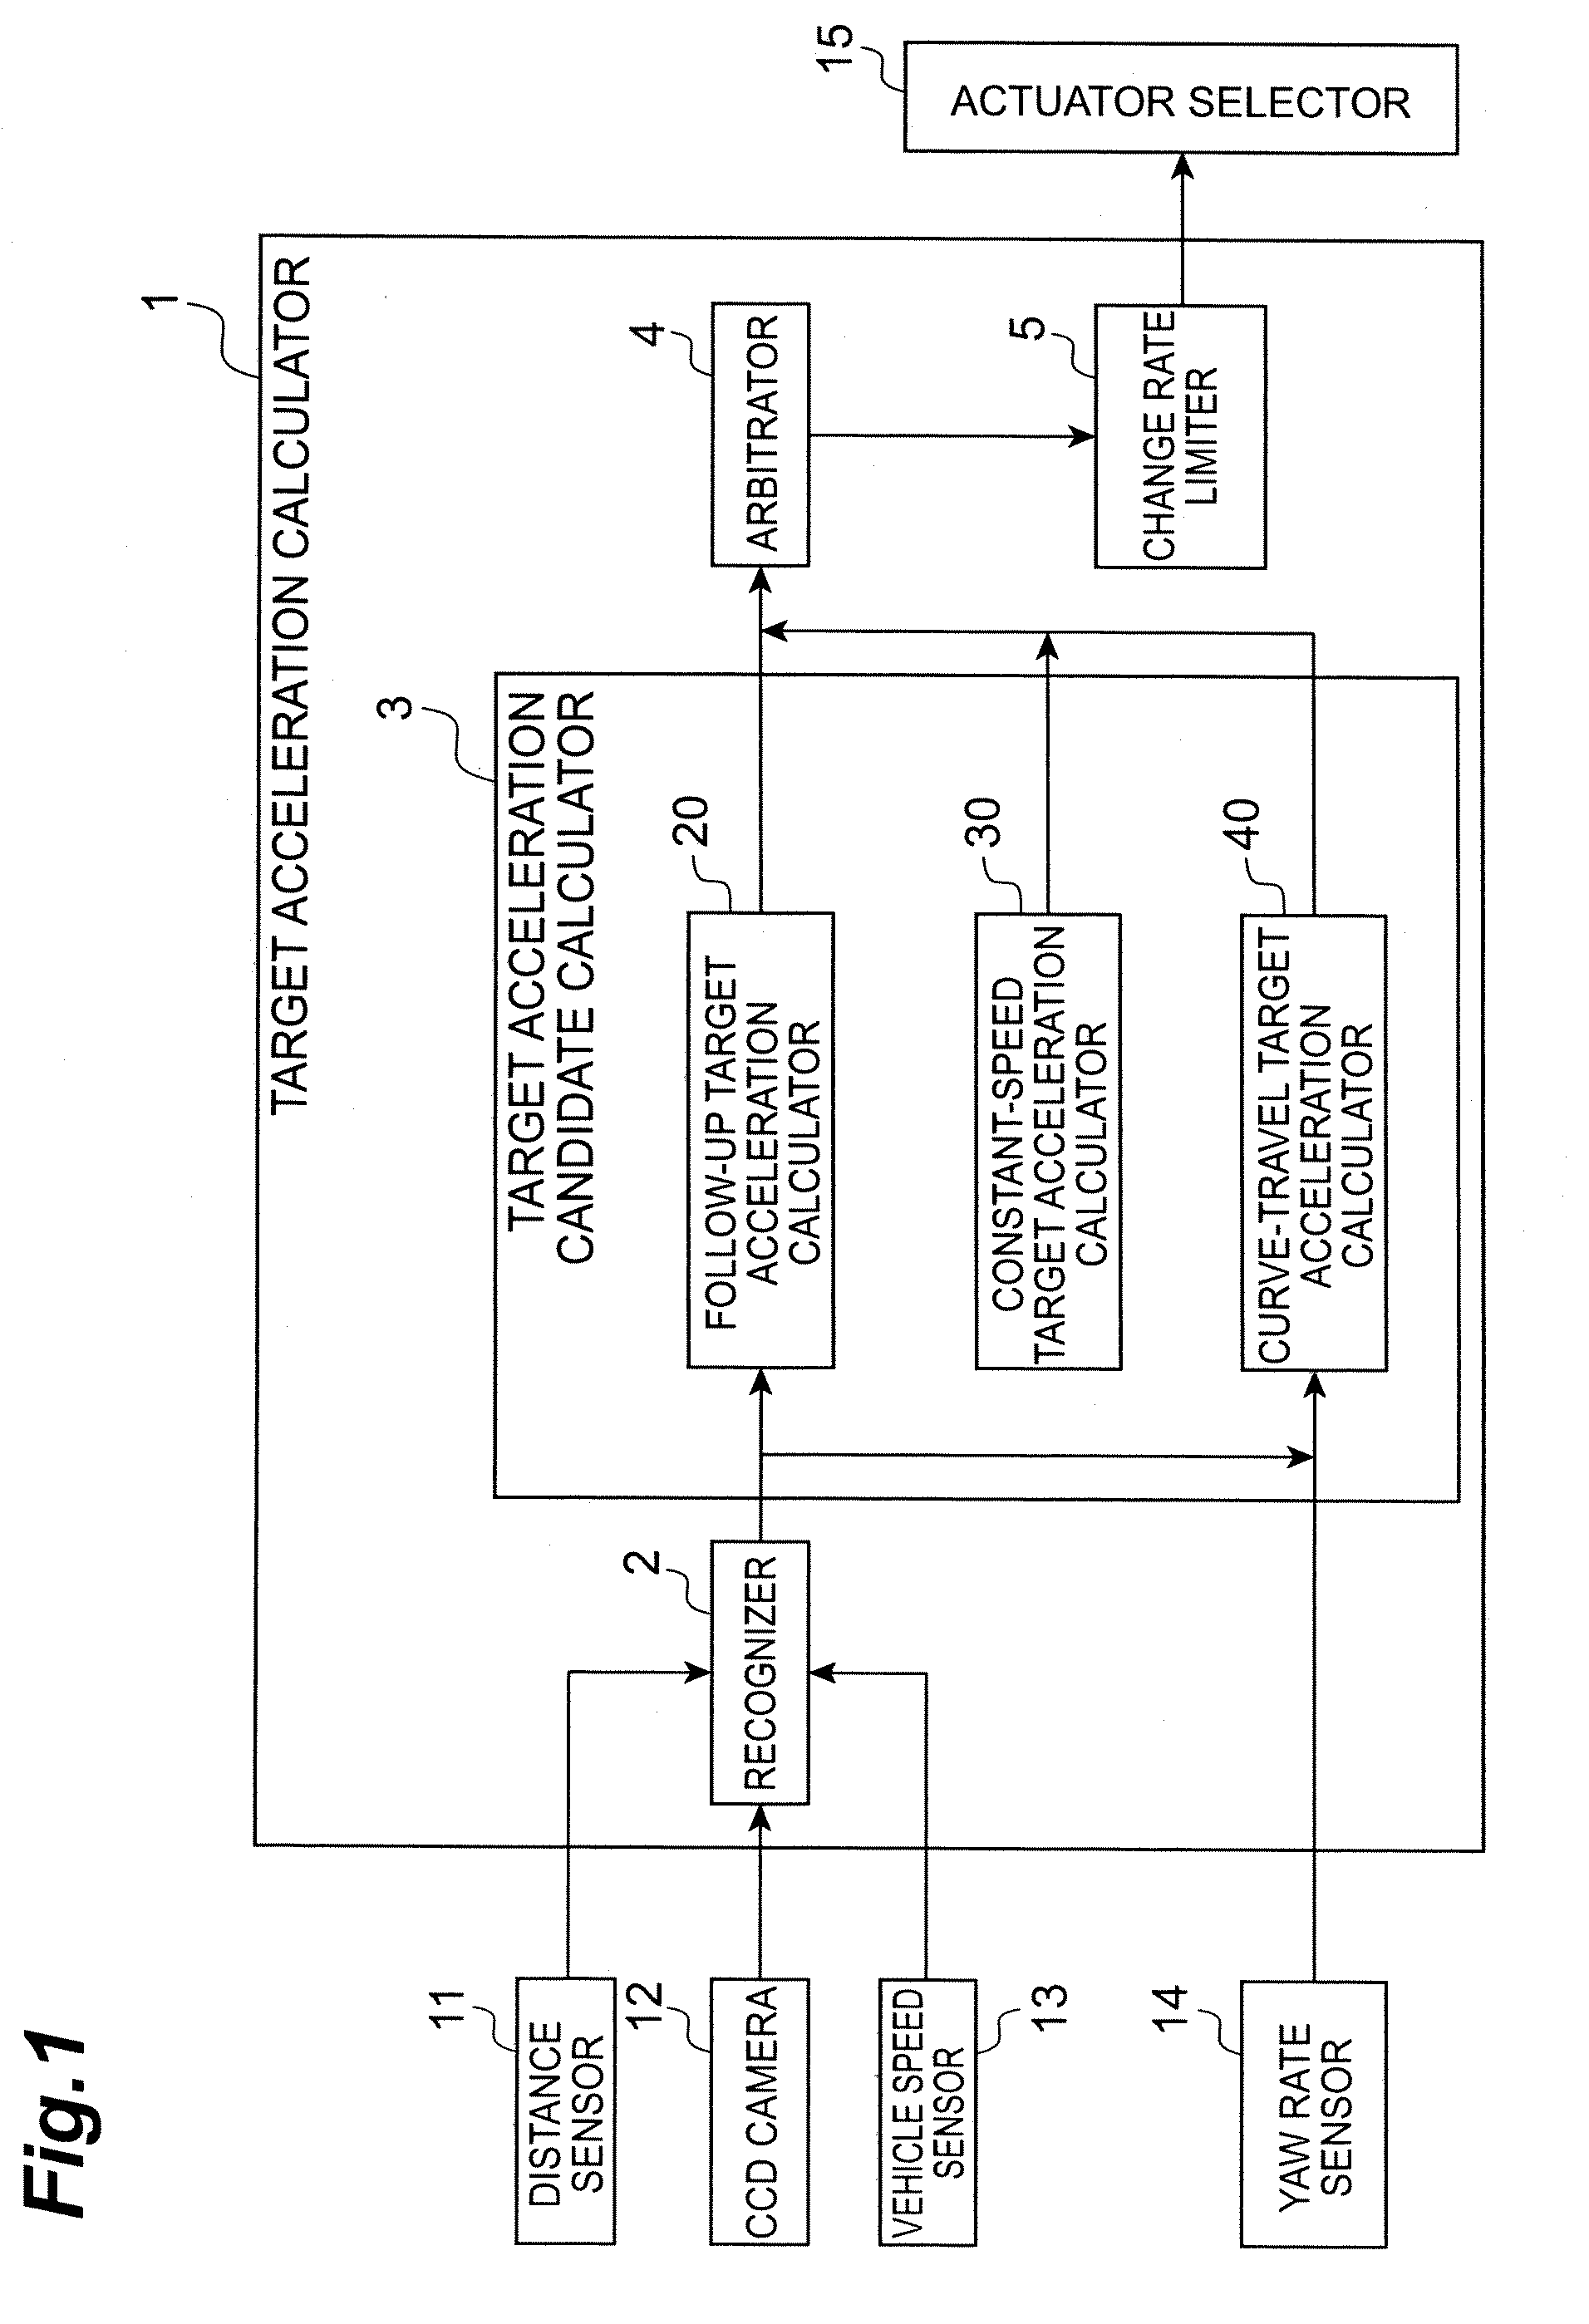 Running control device for vehicle